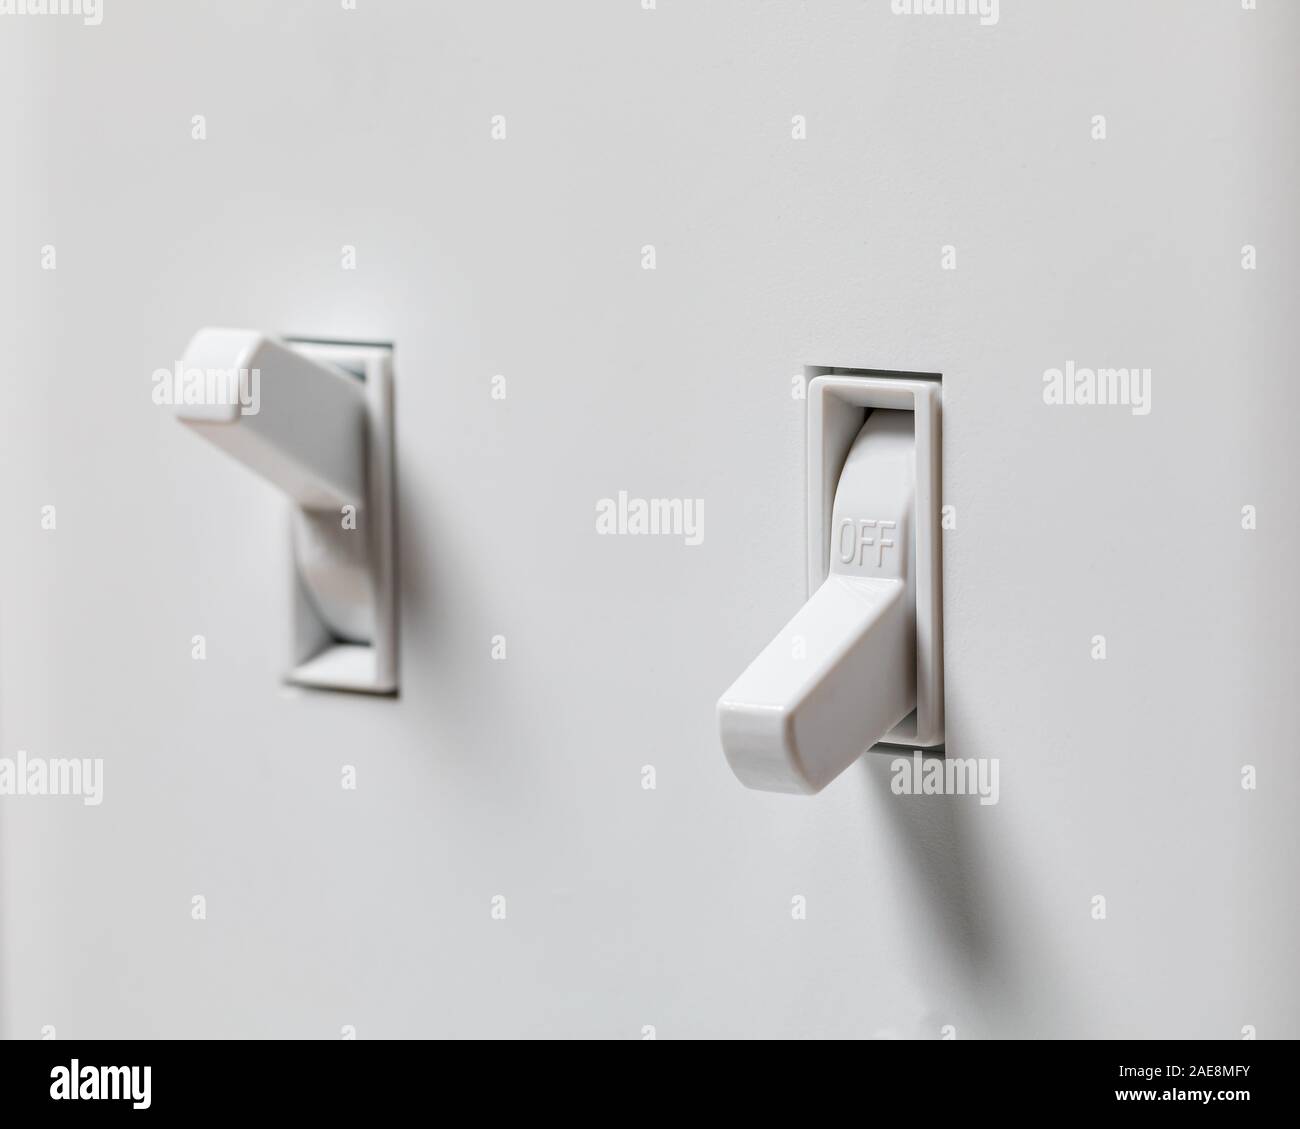 Closeup of white light switch turned off and another turned on in background with duplex wall plate. Concept of energy savings and conservation Stock Photo